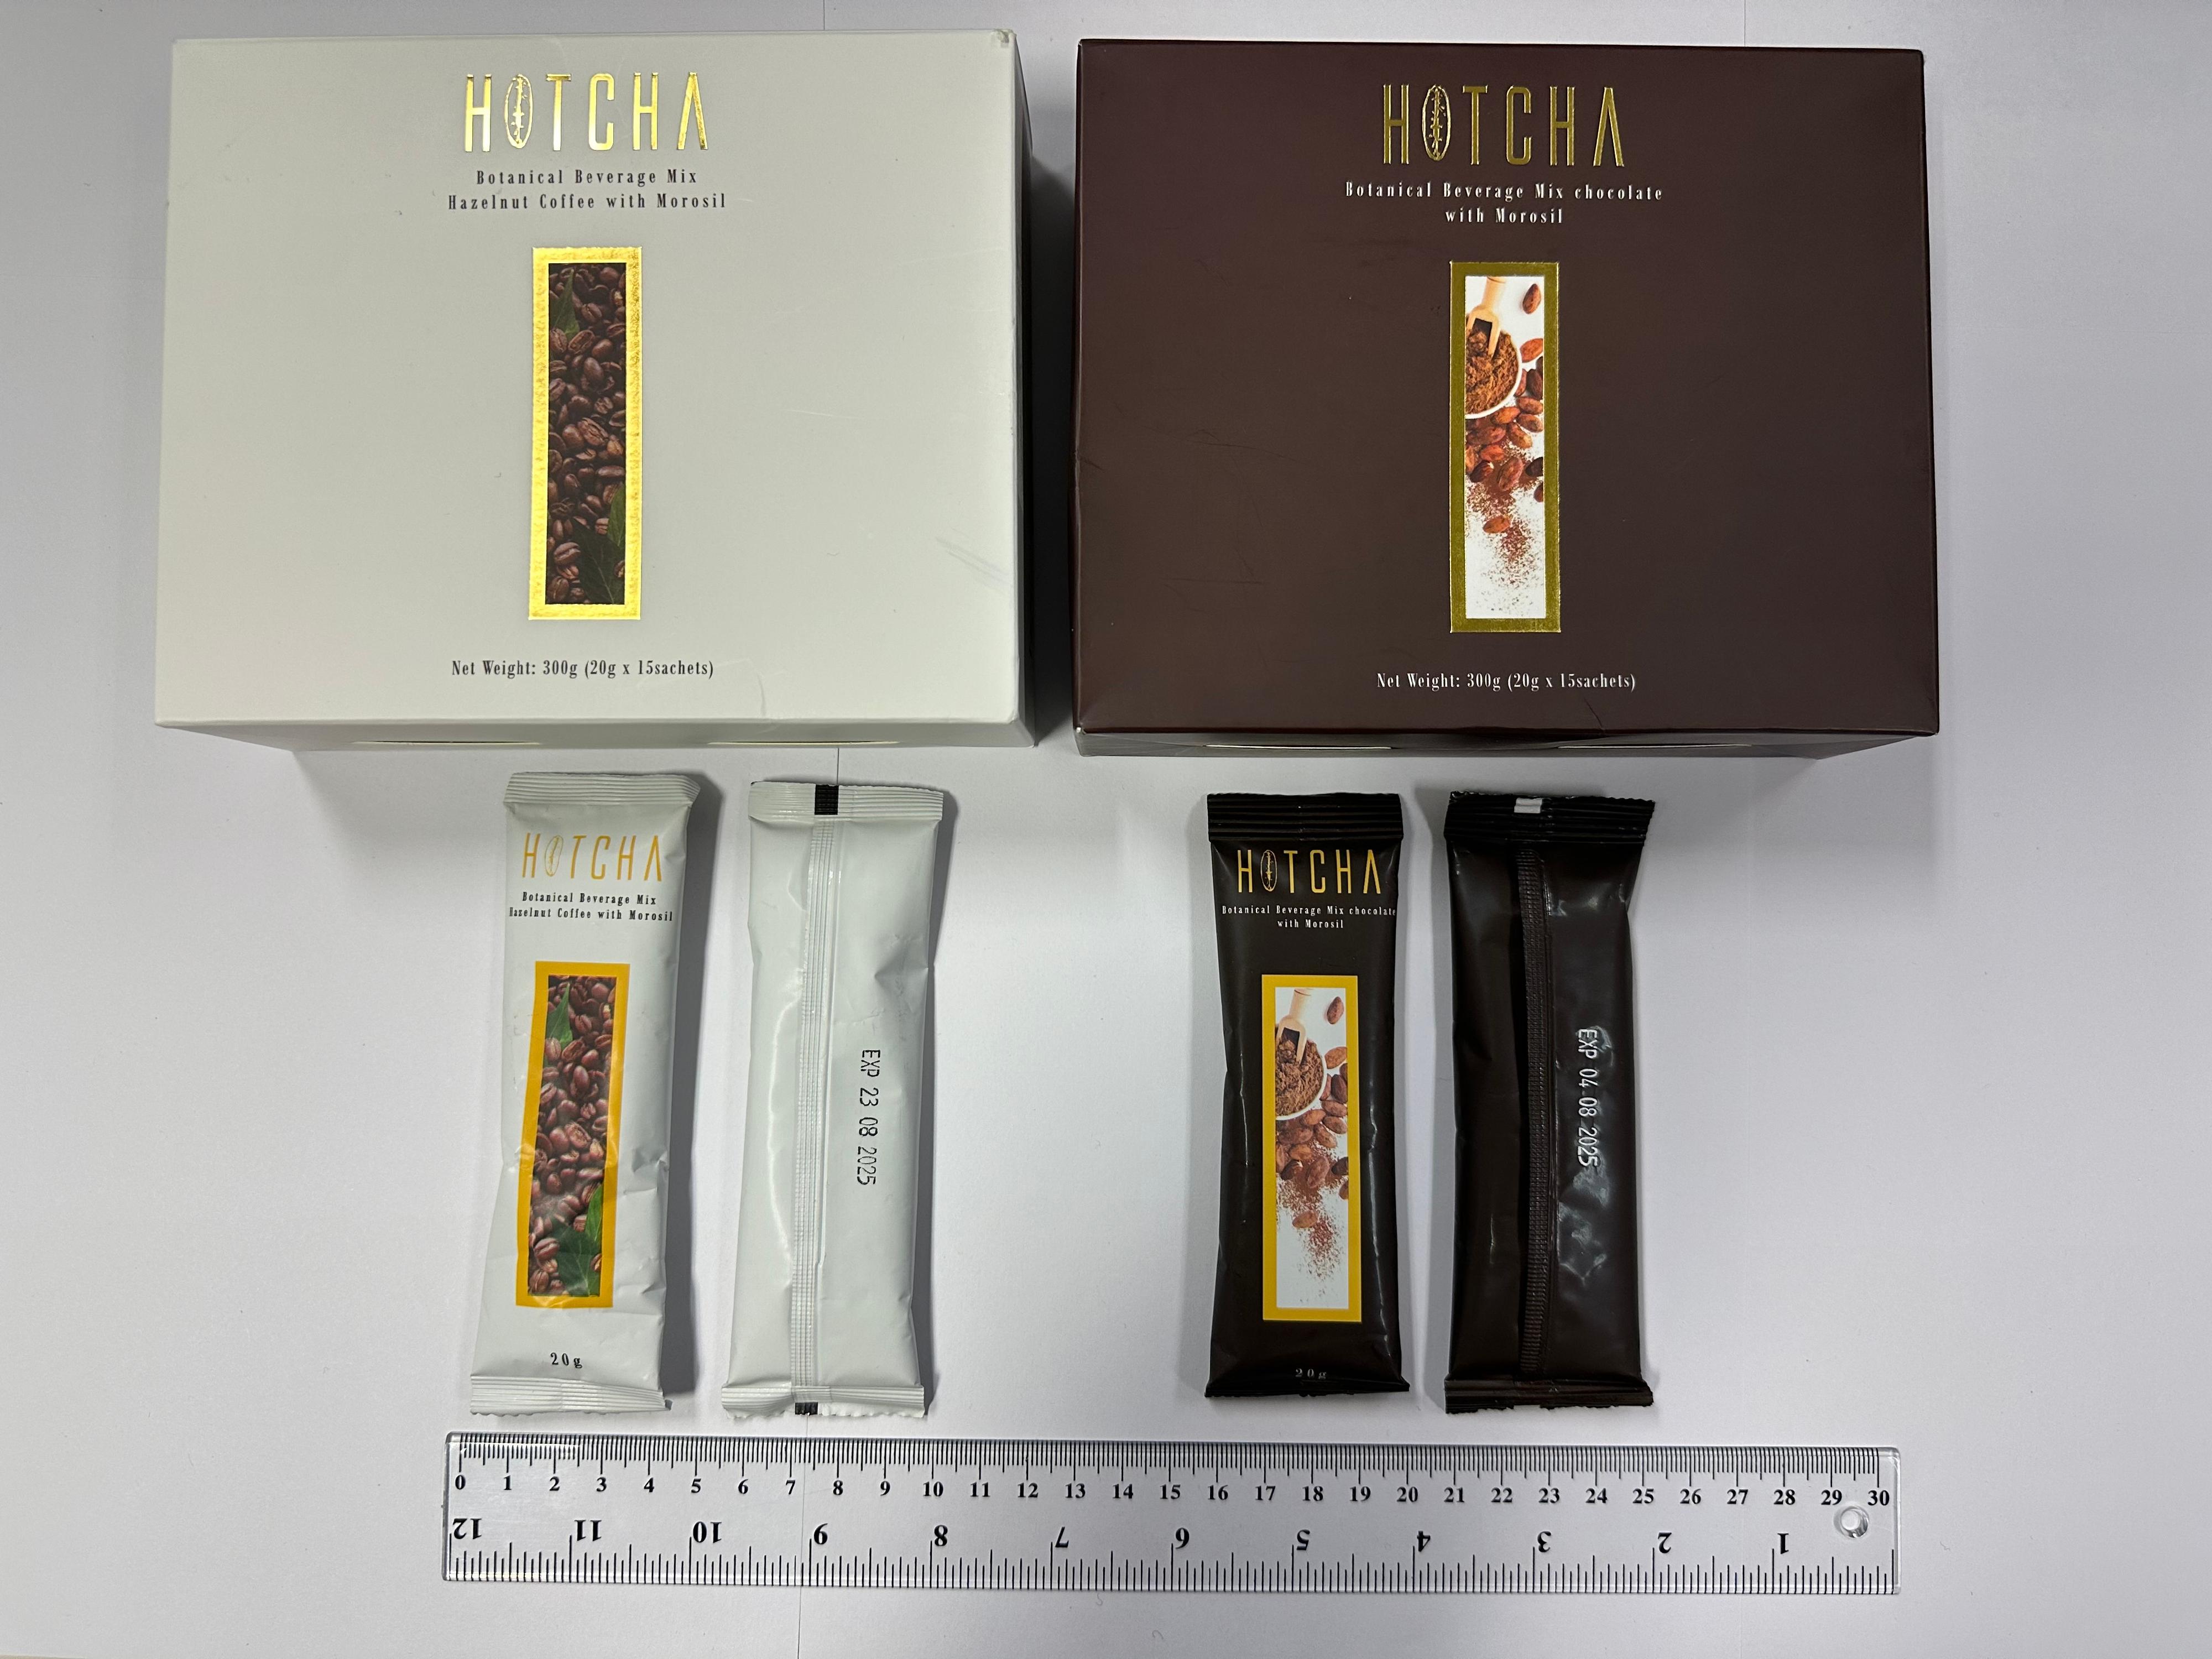 The Department of Health today (February 6) conducted an operation against the sale of two slimming products, namely HOTCHA Botanical Beverage Mix chocolate with Morosil and HOTCHA Botanical Beverage Mix Hazelnut Coffee with Morosil, which were found to contain an undeclared controlled and banned drug ingredient. During the operation, a 40-year-old woman was arrested by the Police for suspected illegal sale and possession of unregistered pharmaceutical products and Part 1 poisons. Photo shows the two products.